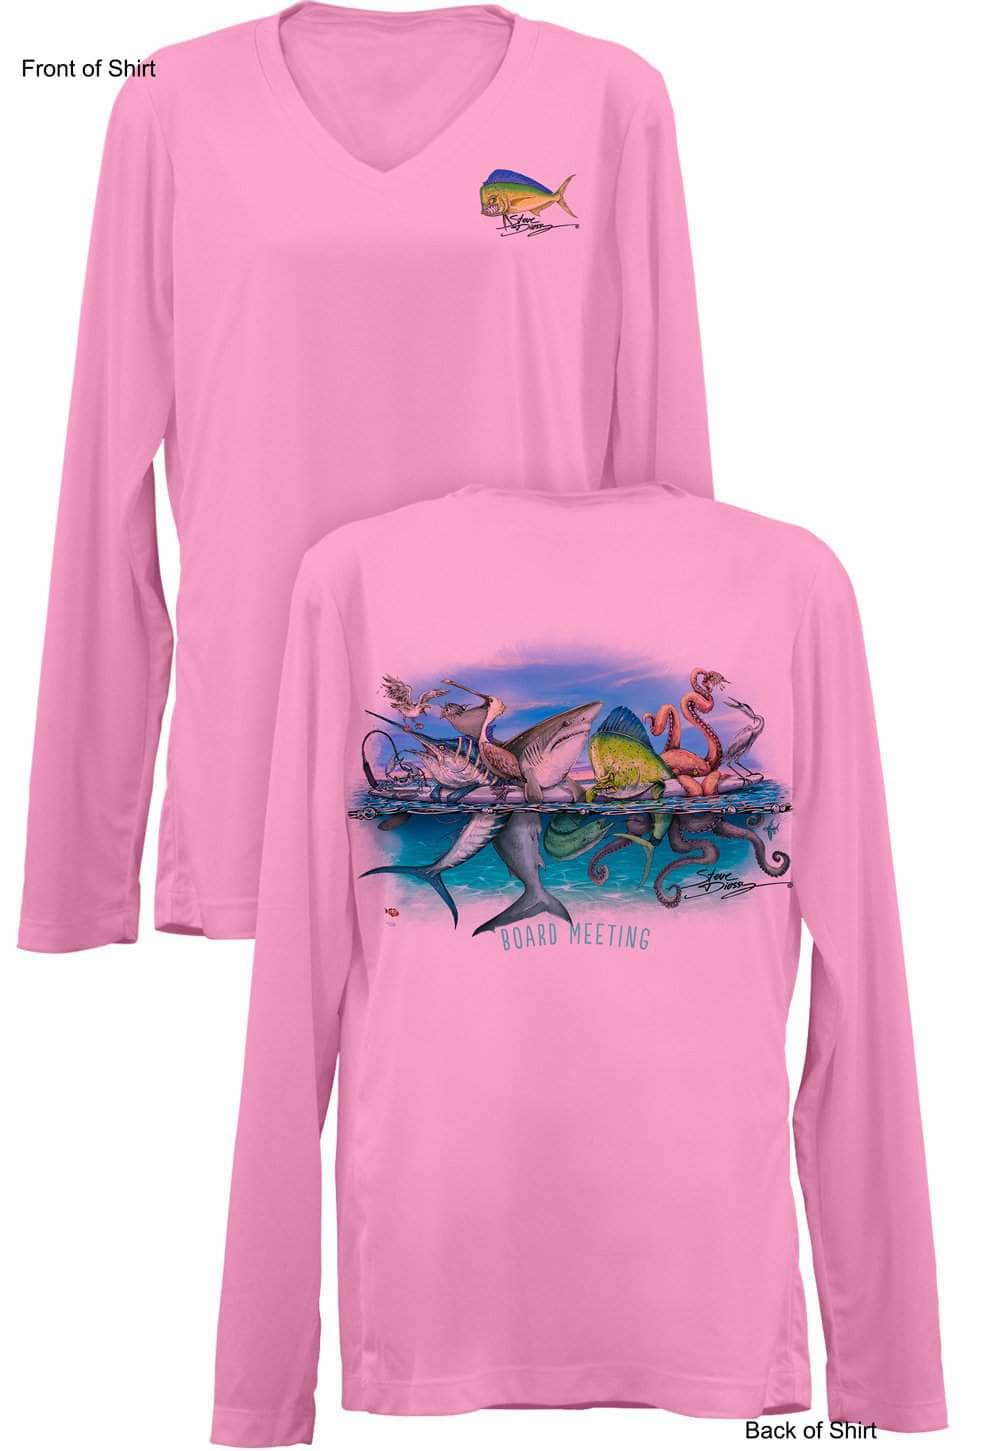 Board Meeting- Ladies Long Sleeve V-Neck-100% Polyester